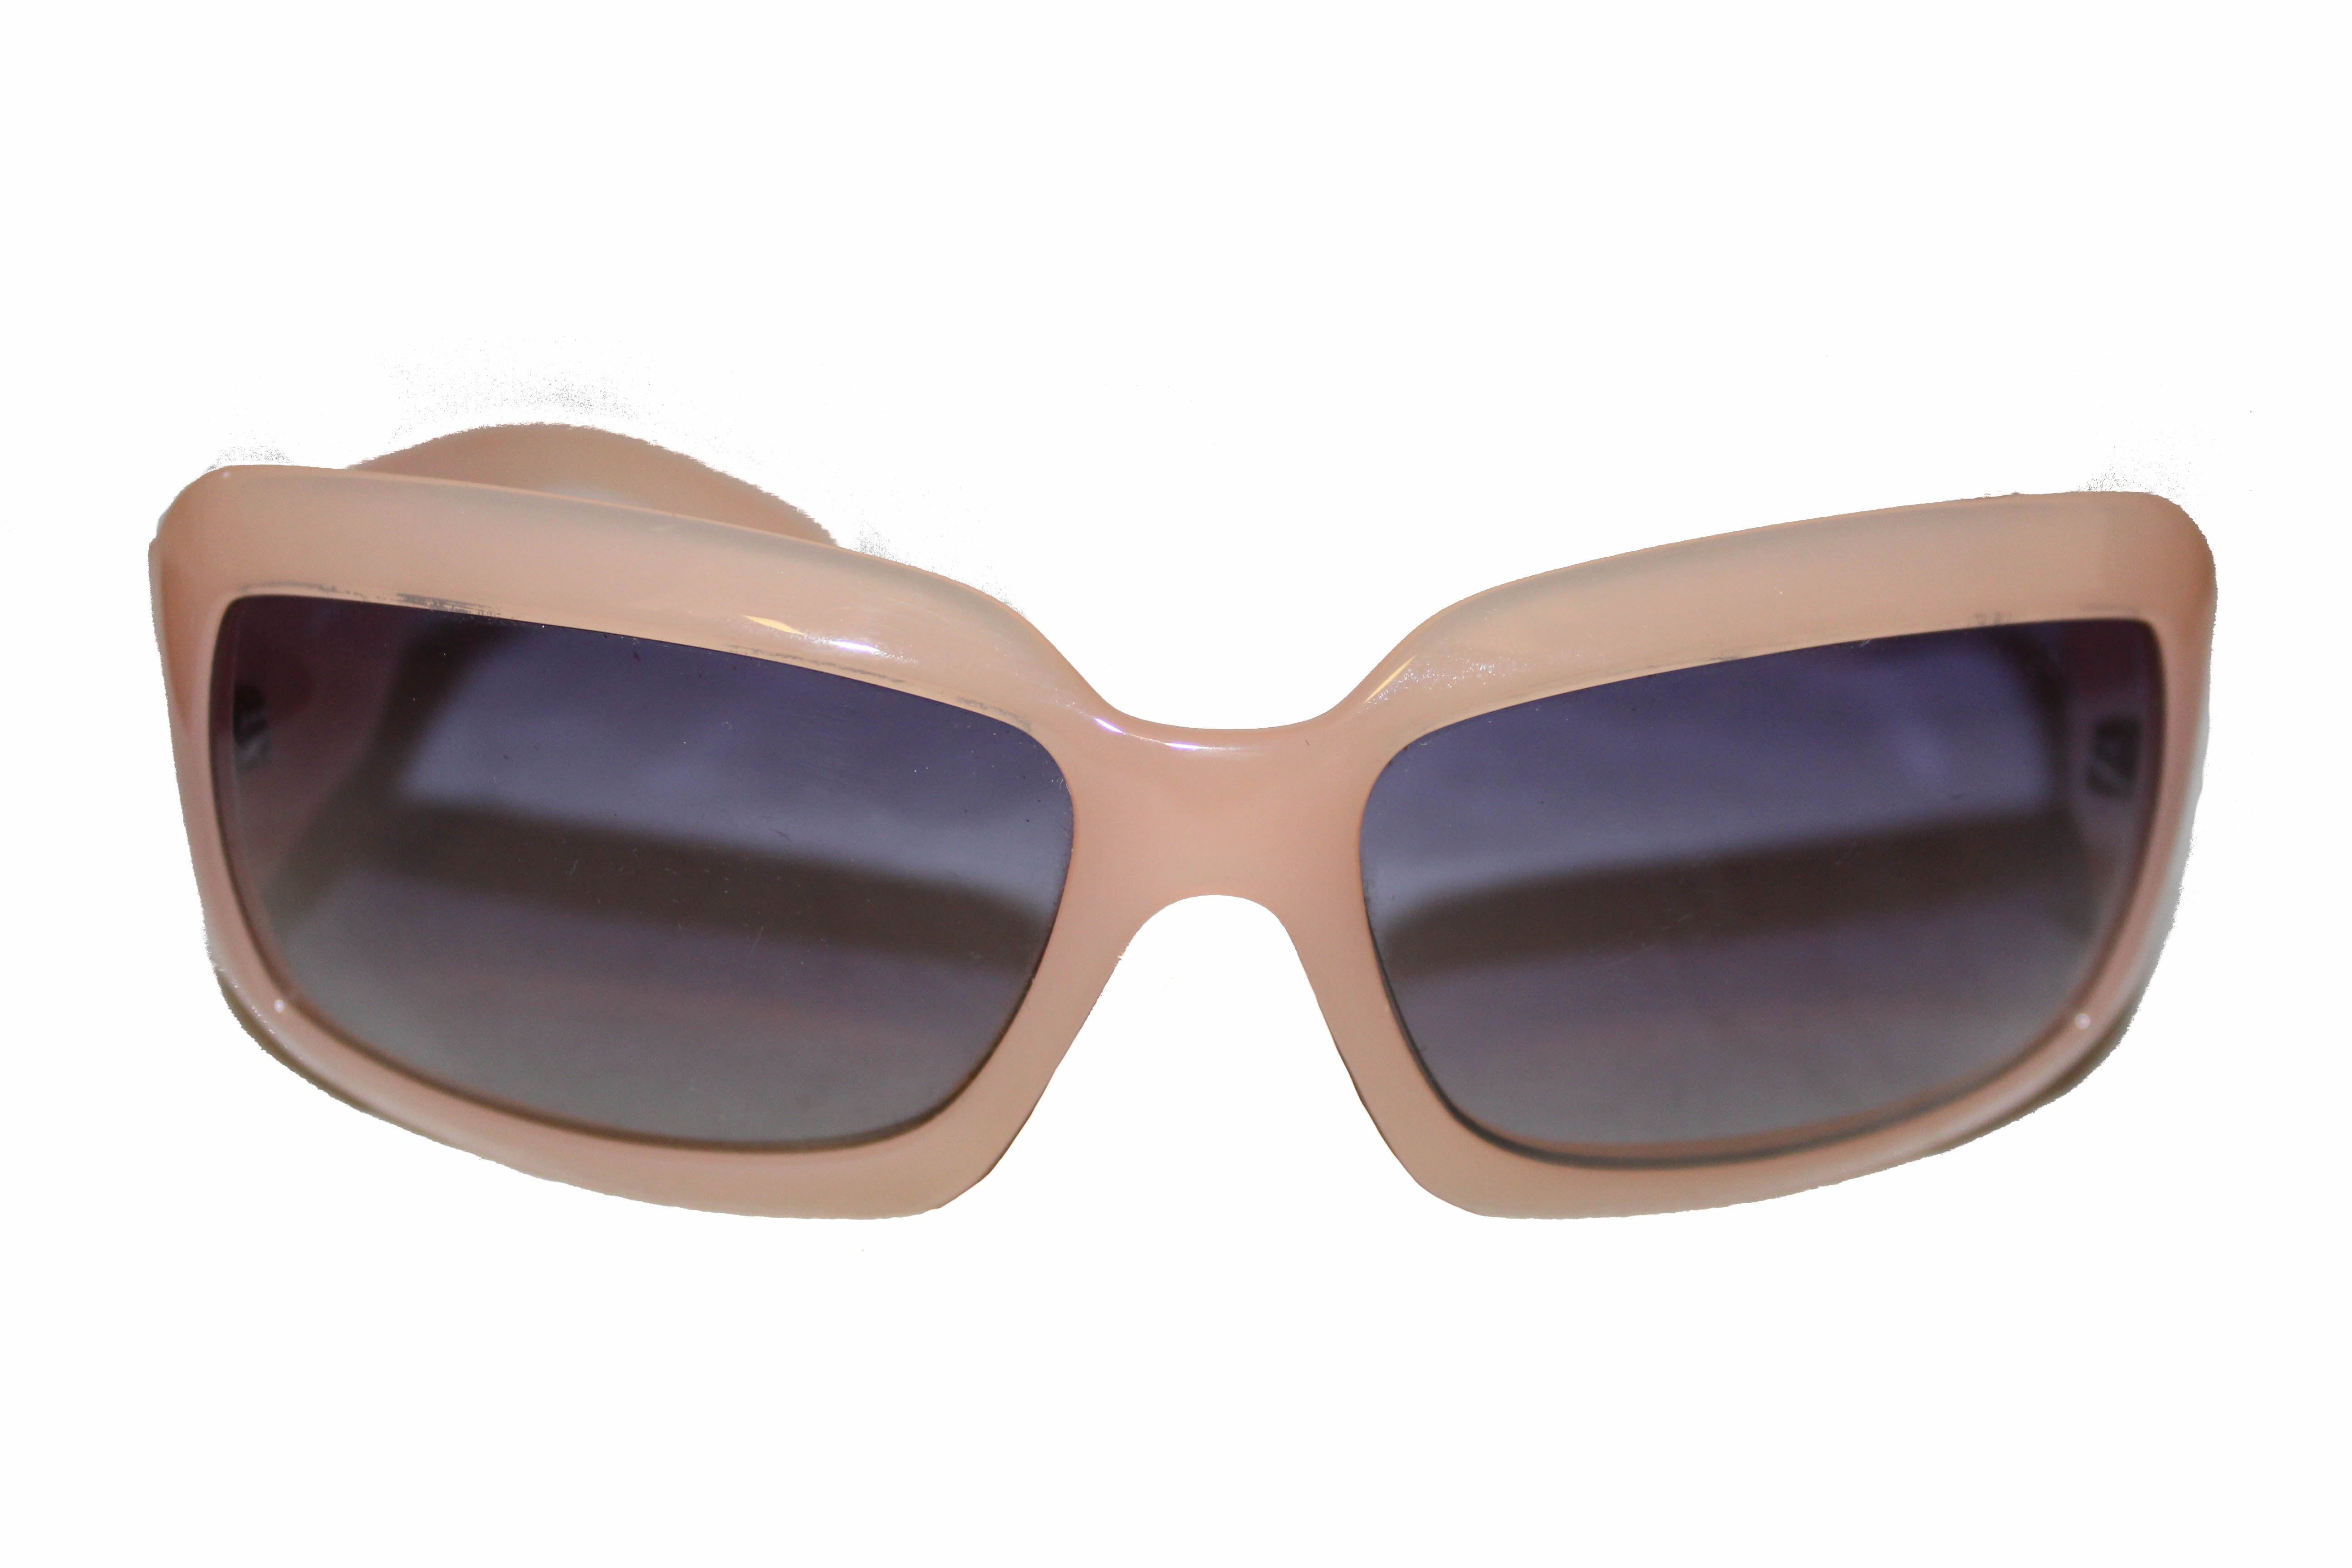 Chanel Black Frame Mother-of-Pearl CC Logo Sunglasses - 5076